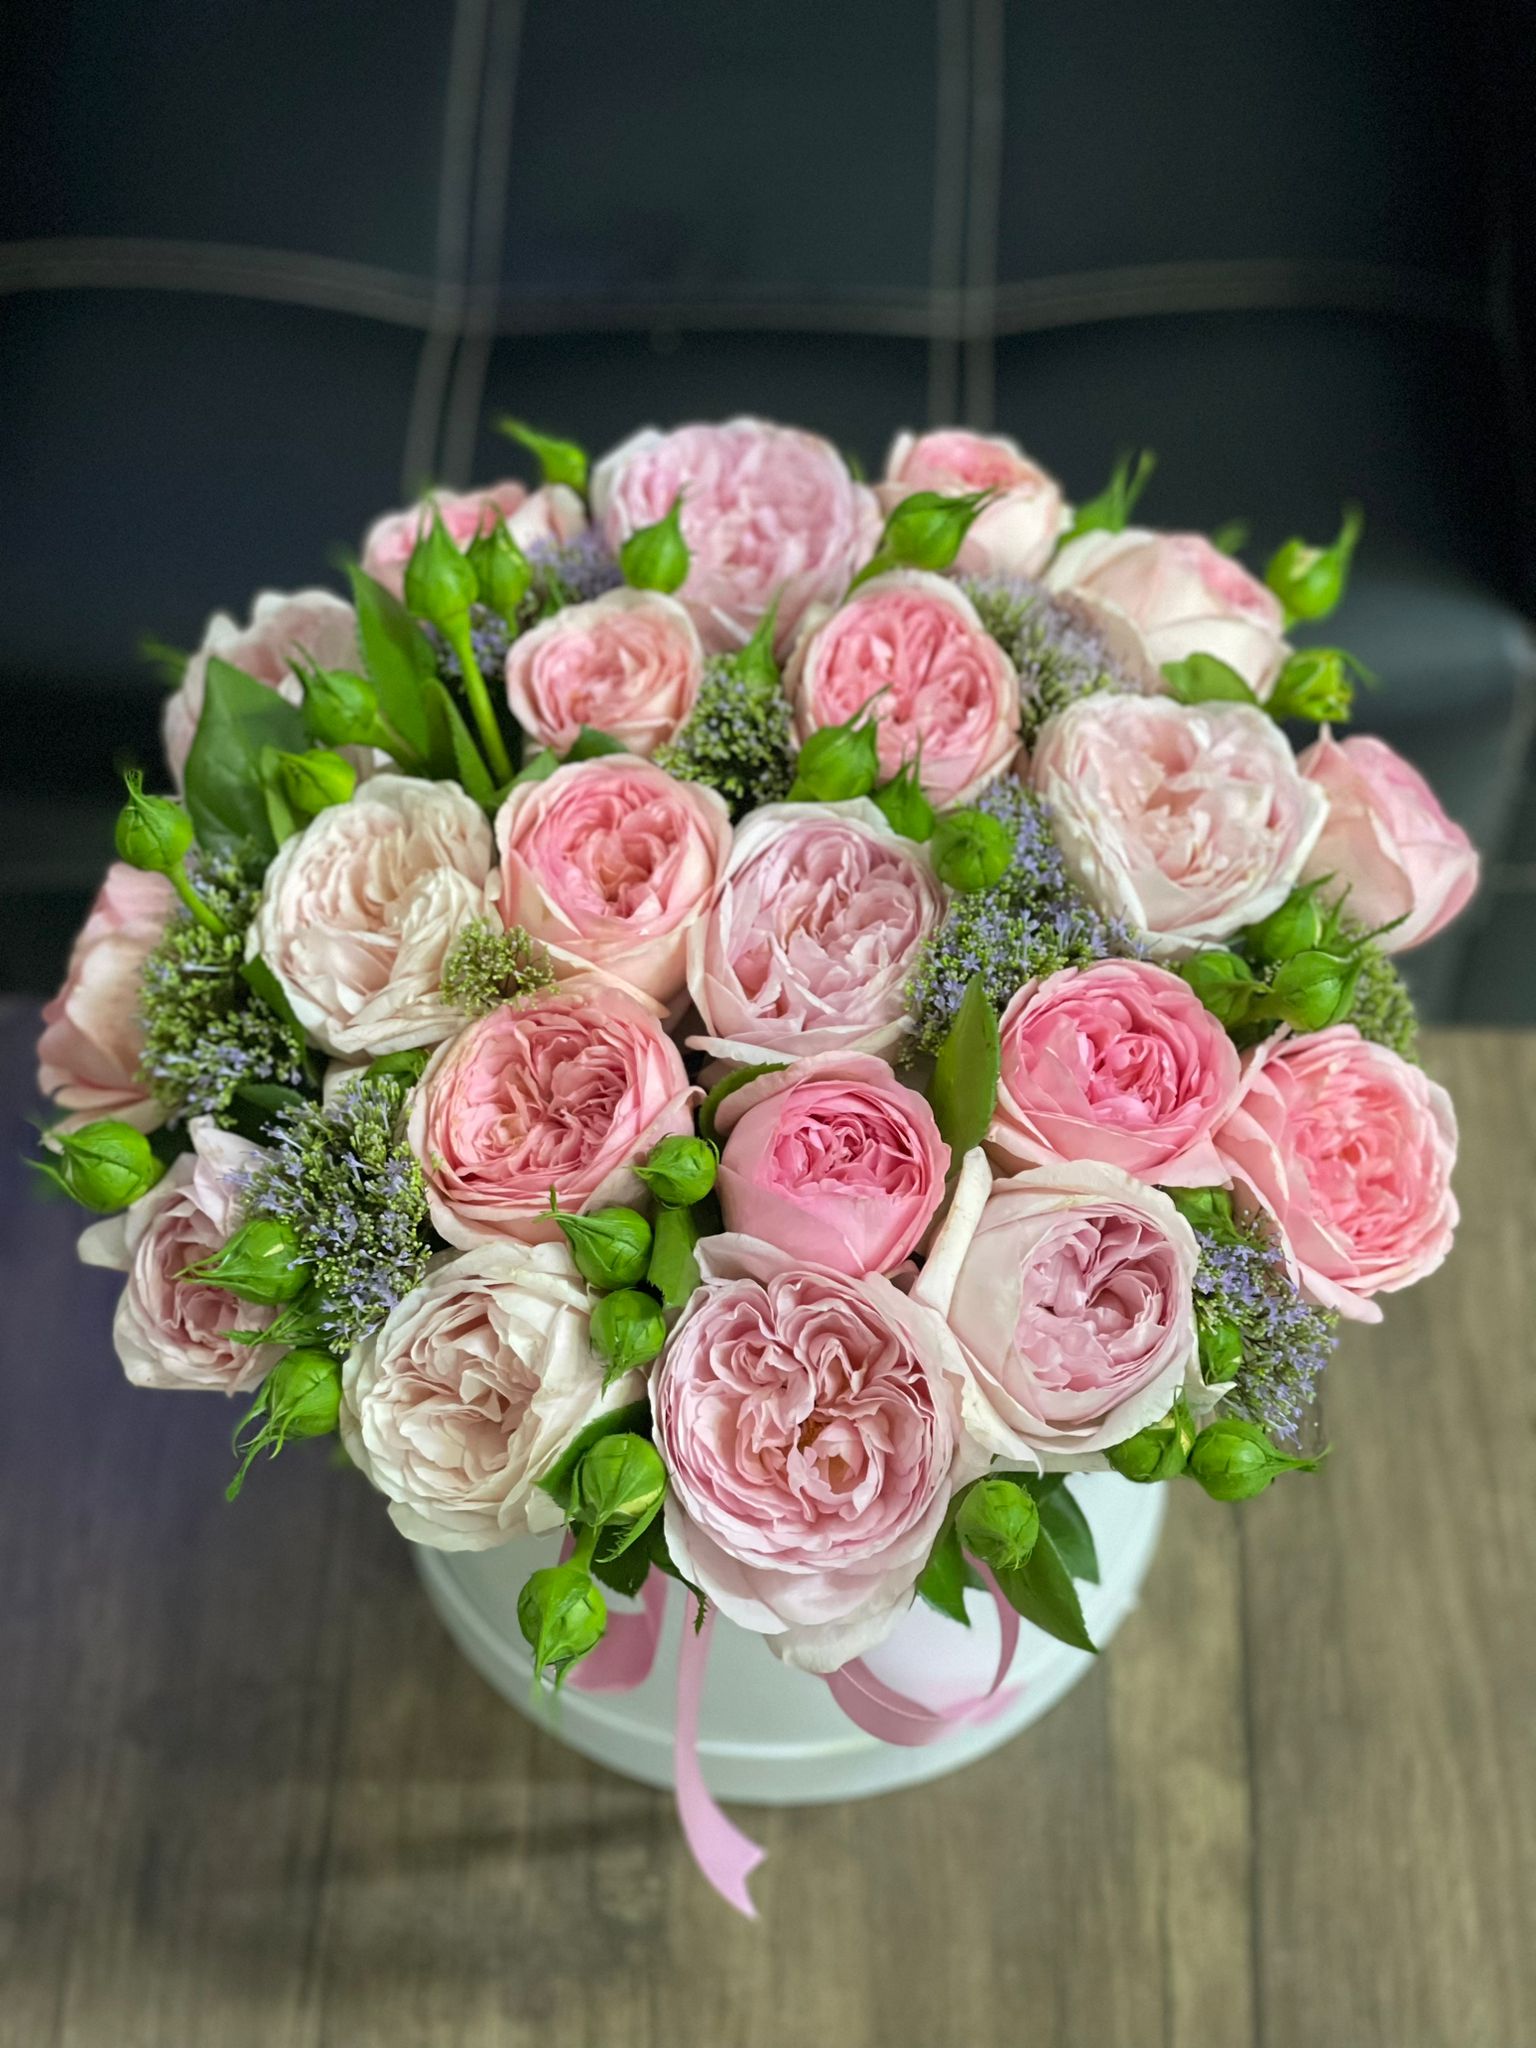  Kemer Flower Delivery 21 Pieces of Pion Roses in a White Box